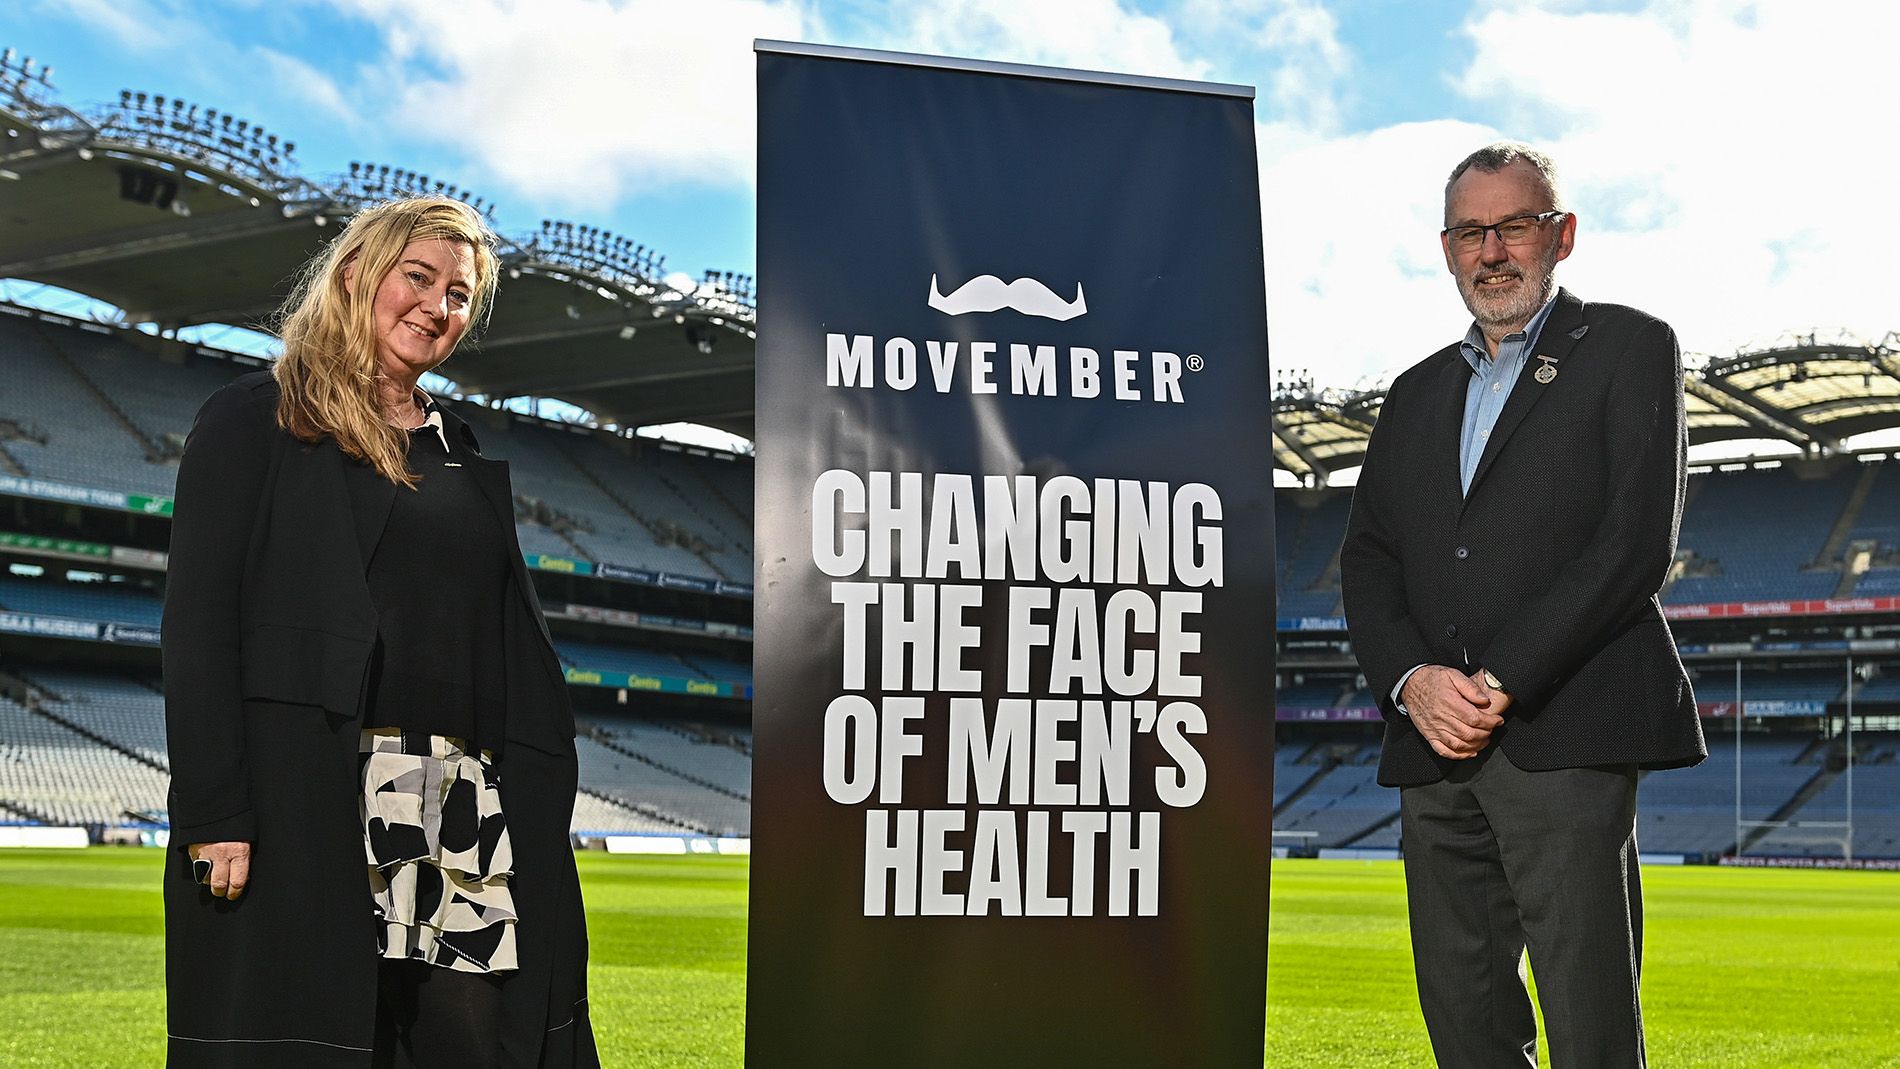 Movember staff lady and GAA staff man standing on Croke park football pitch posing for camera